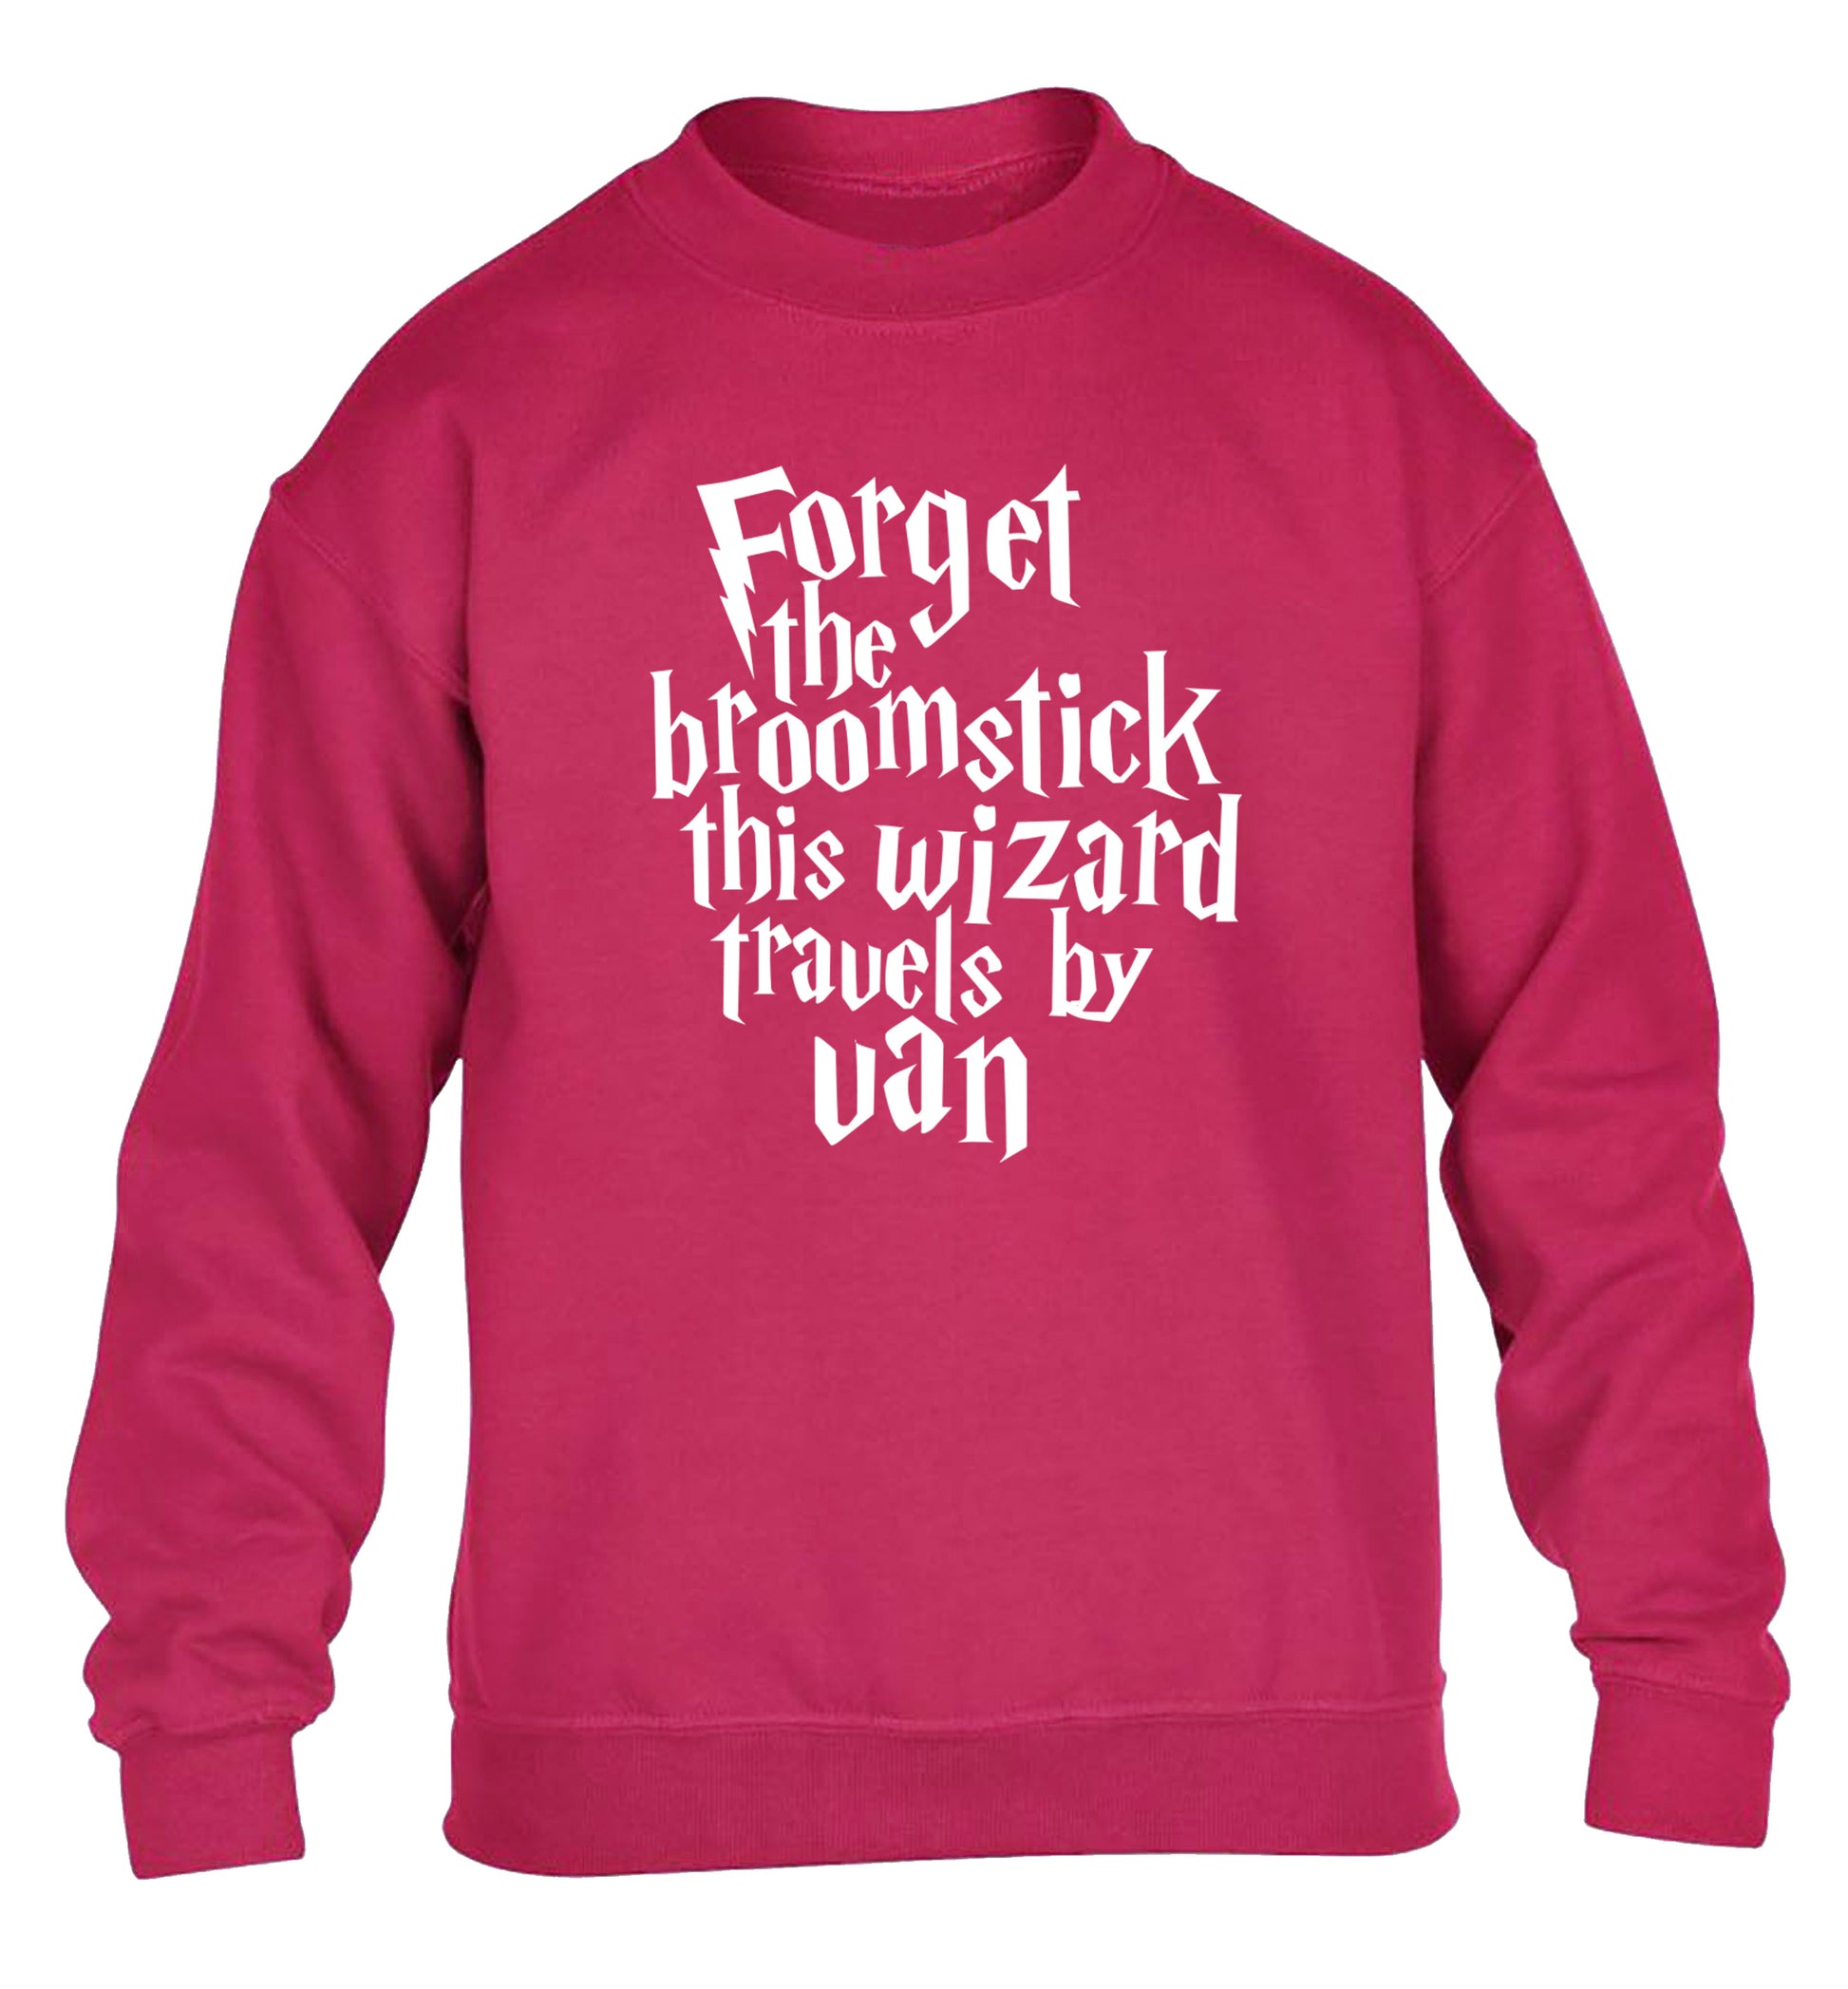 Forget the broomstick this wizard travels by van children's pink sweater 12-14 Years